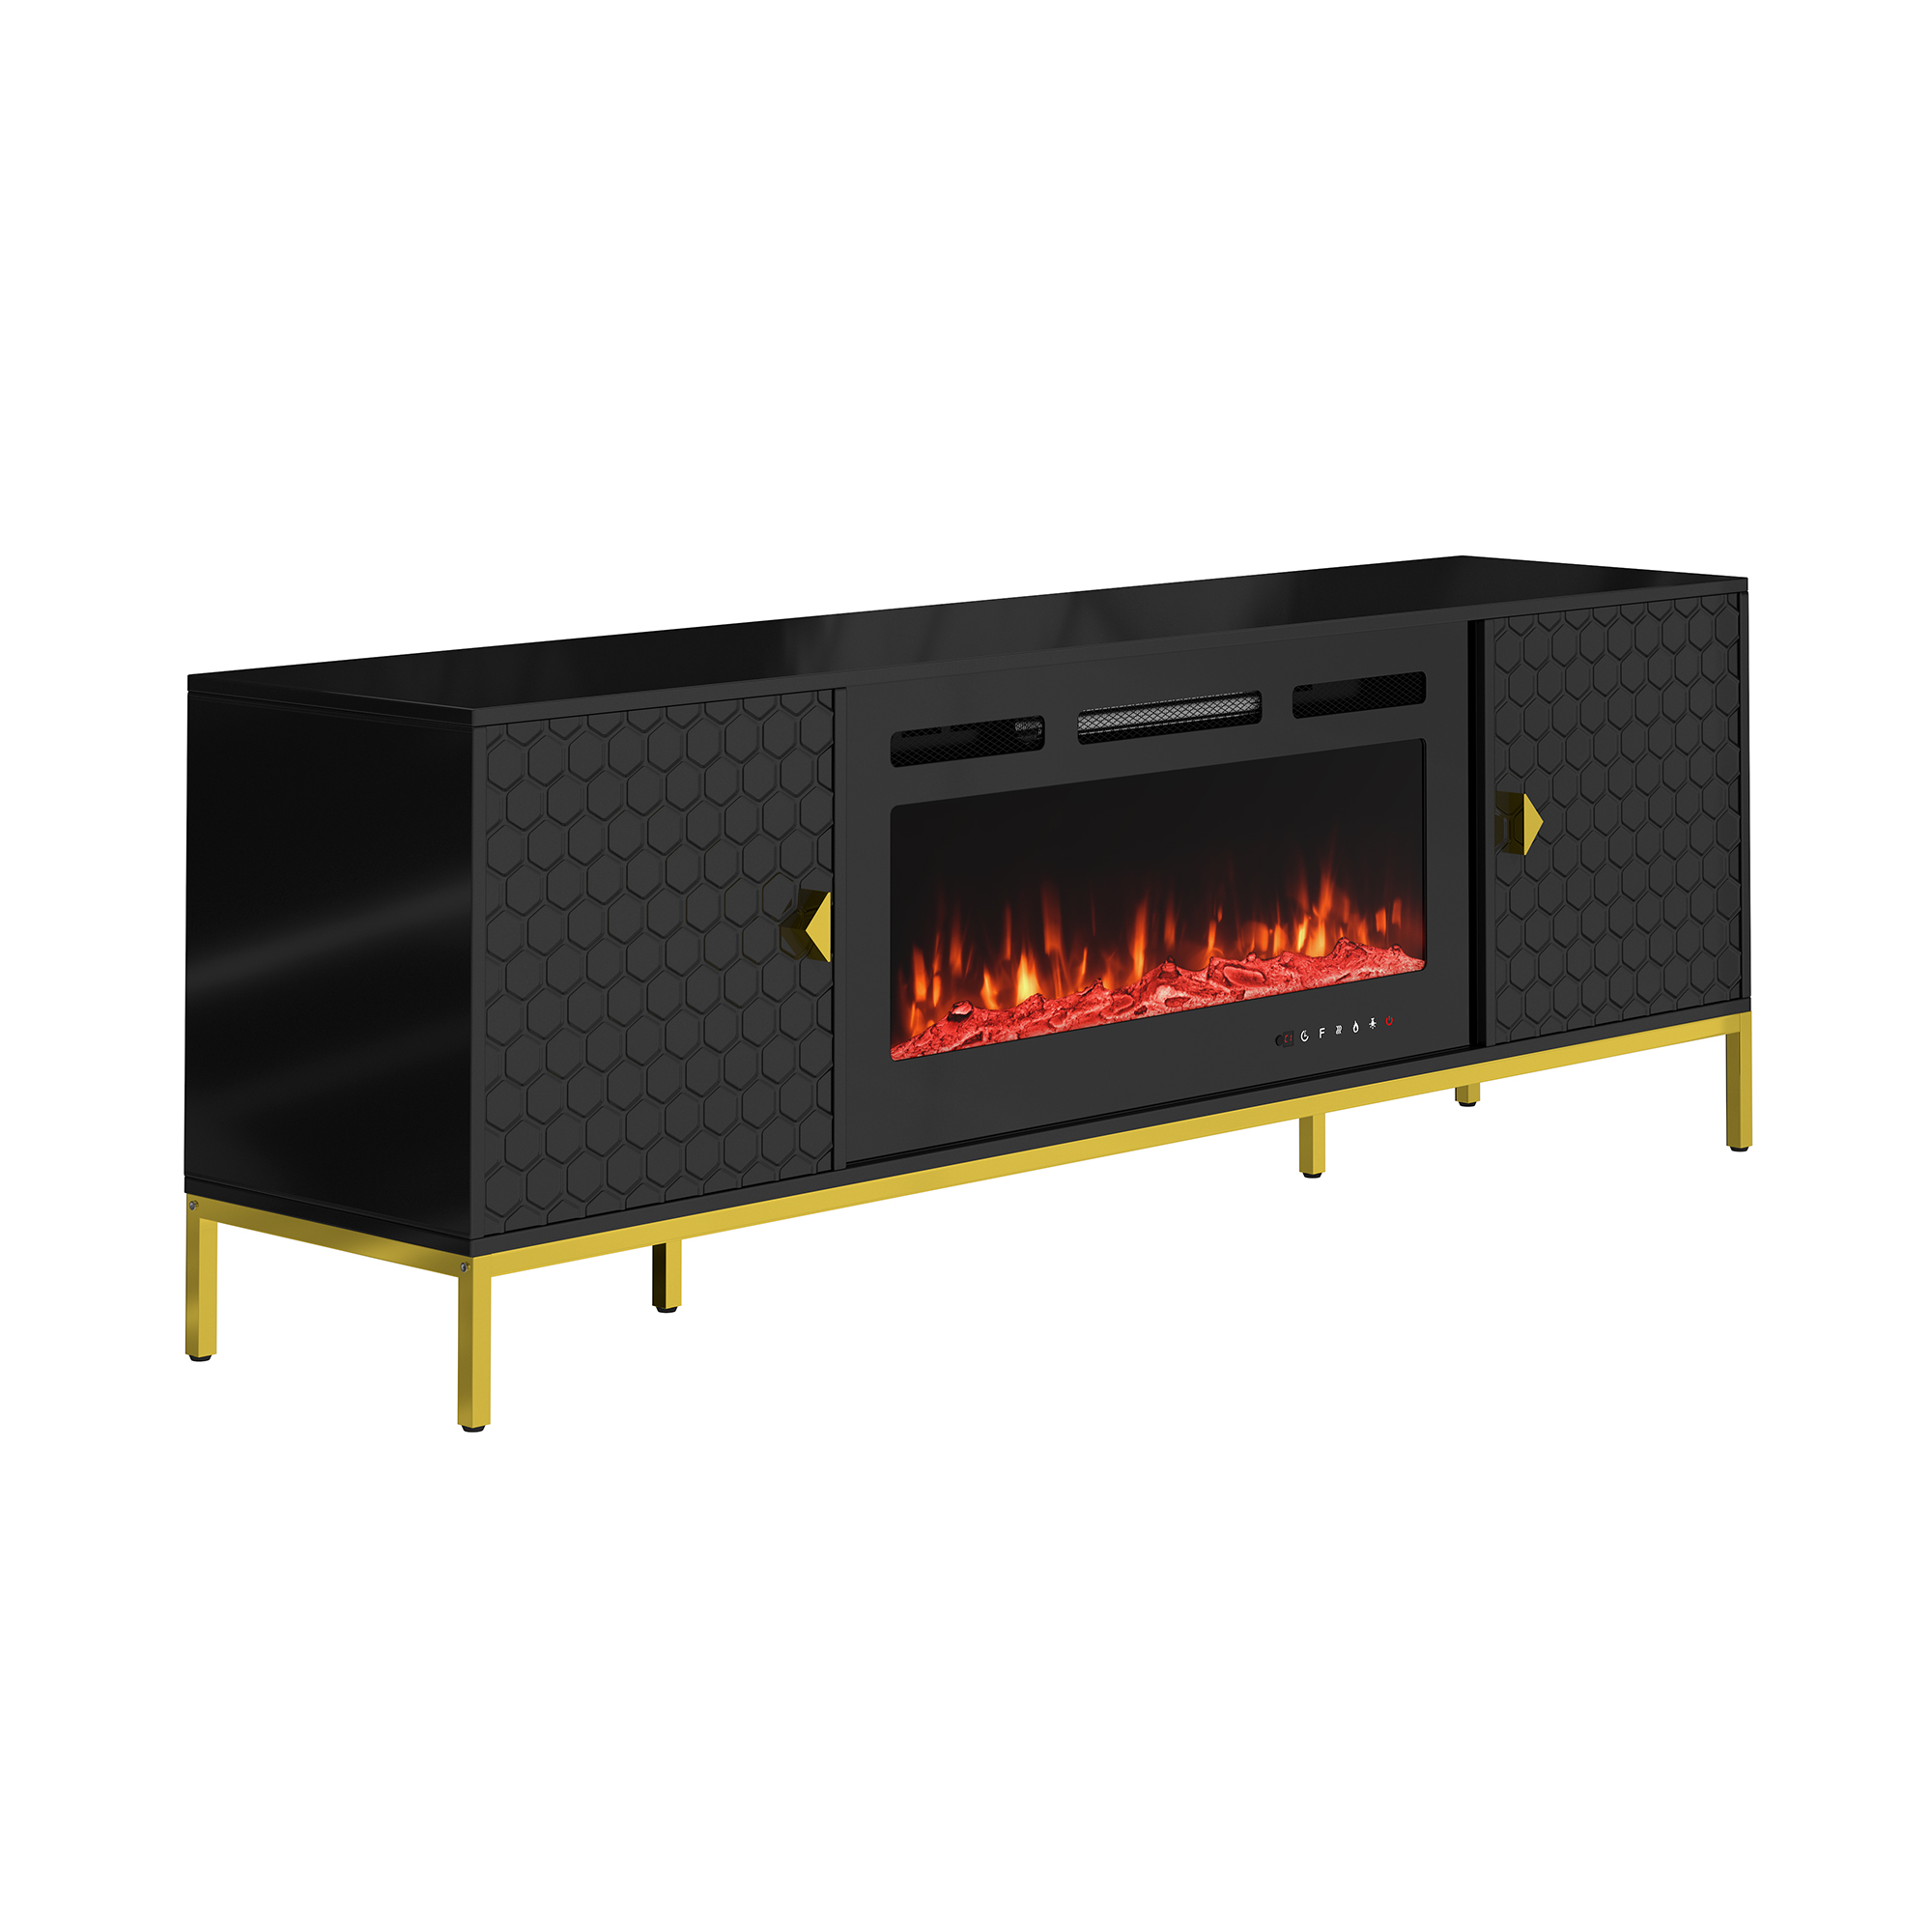 TV Stand with Built-in 36" Electric Fireplace Fits TVs Up to 75"